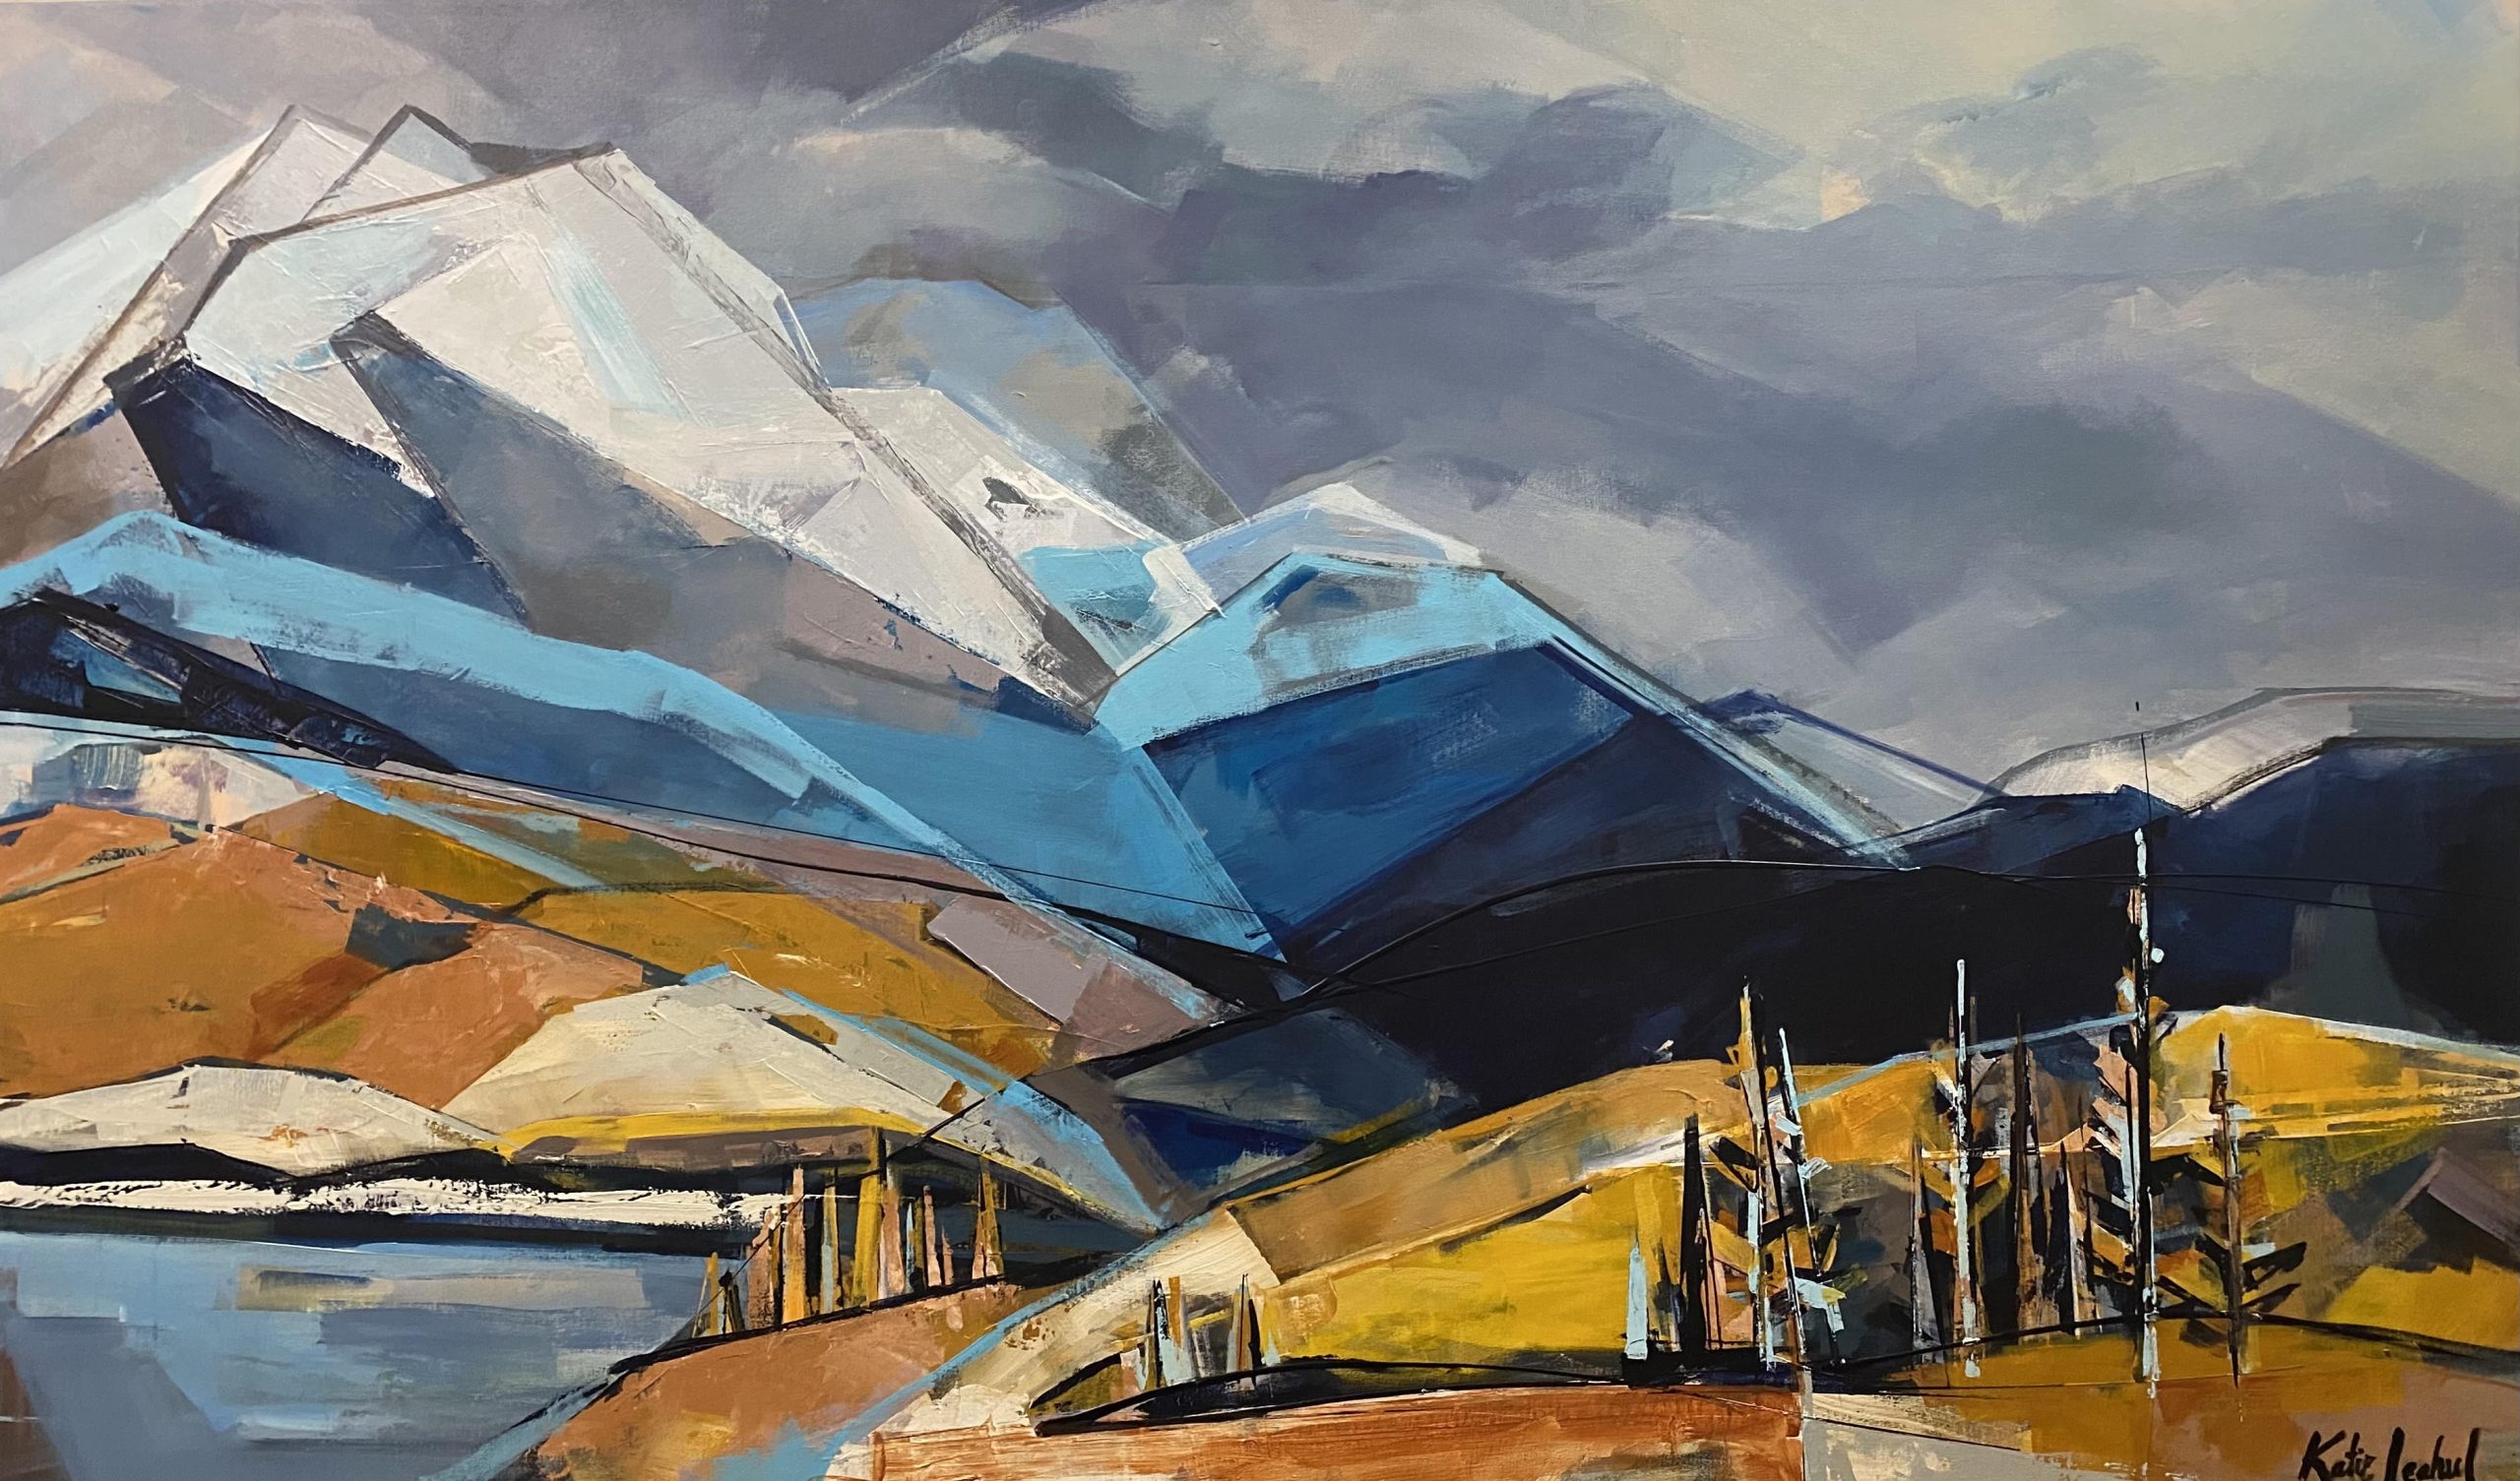 Windermere Lake, landscape painting by Katie Leahul | Effusion Art Gallery + Cast Glass Studio, Invermere BC